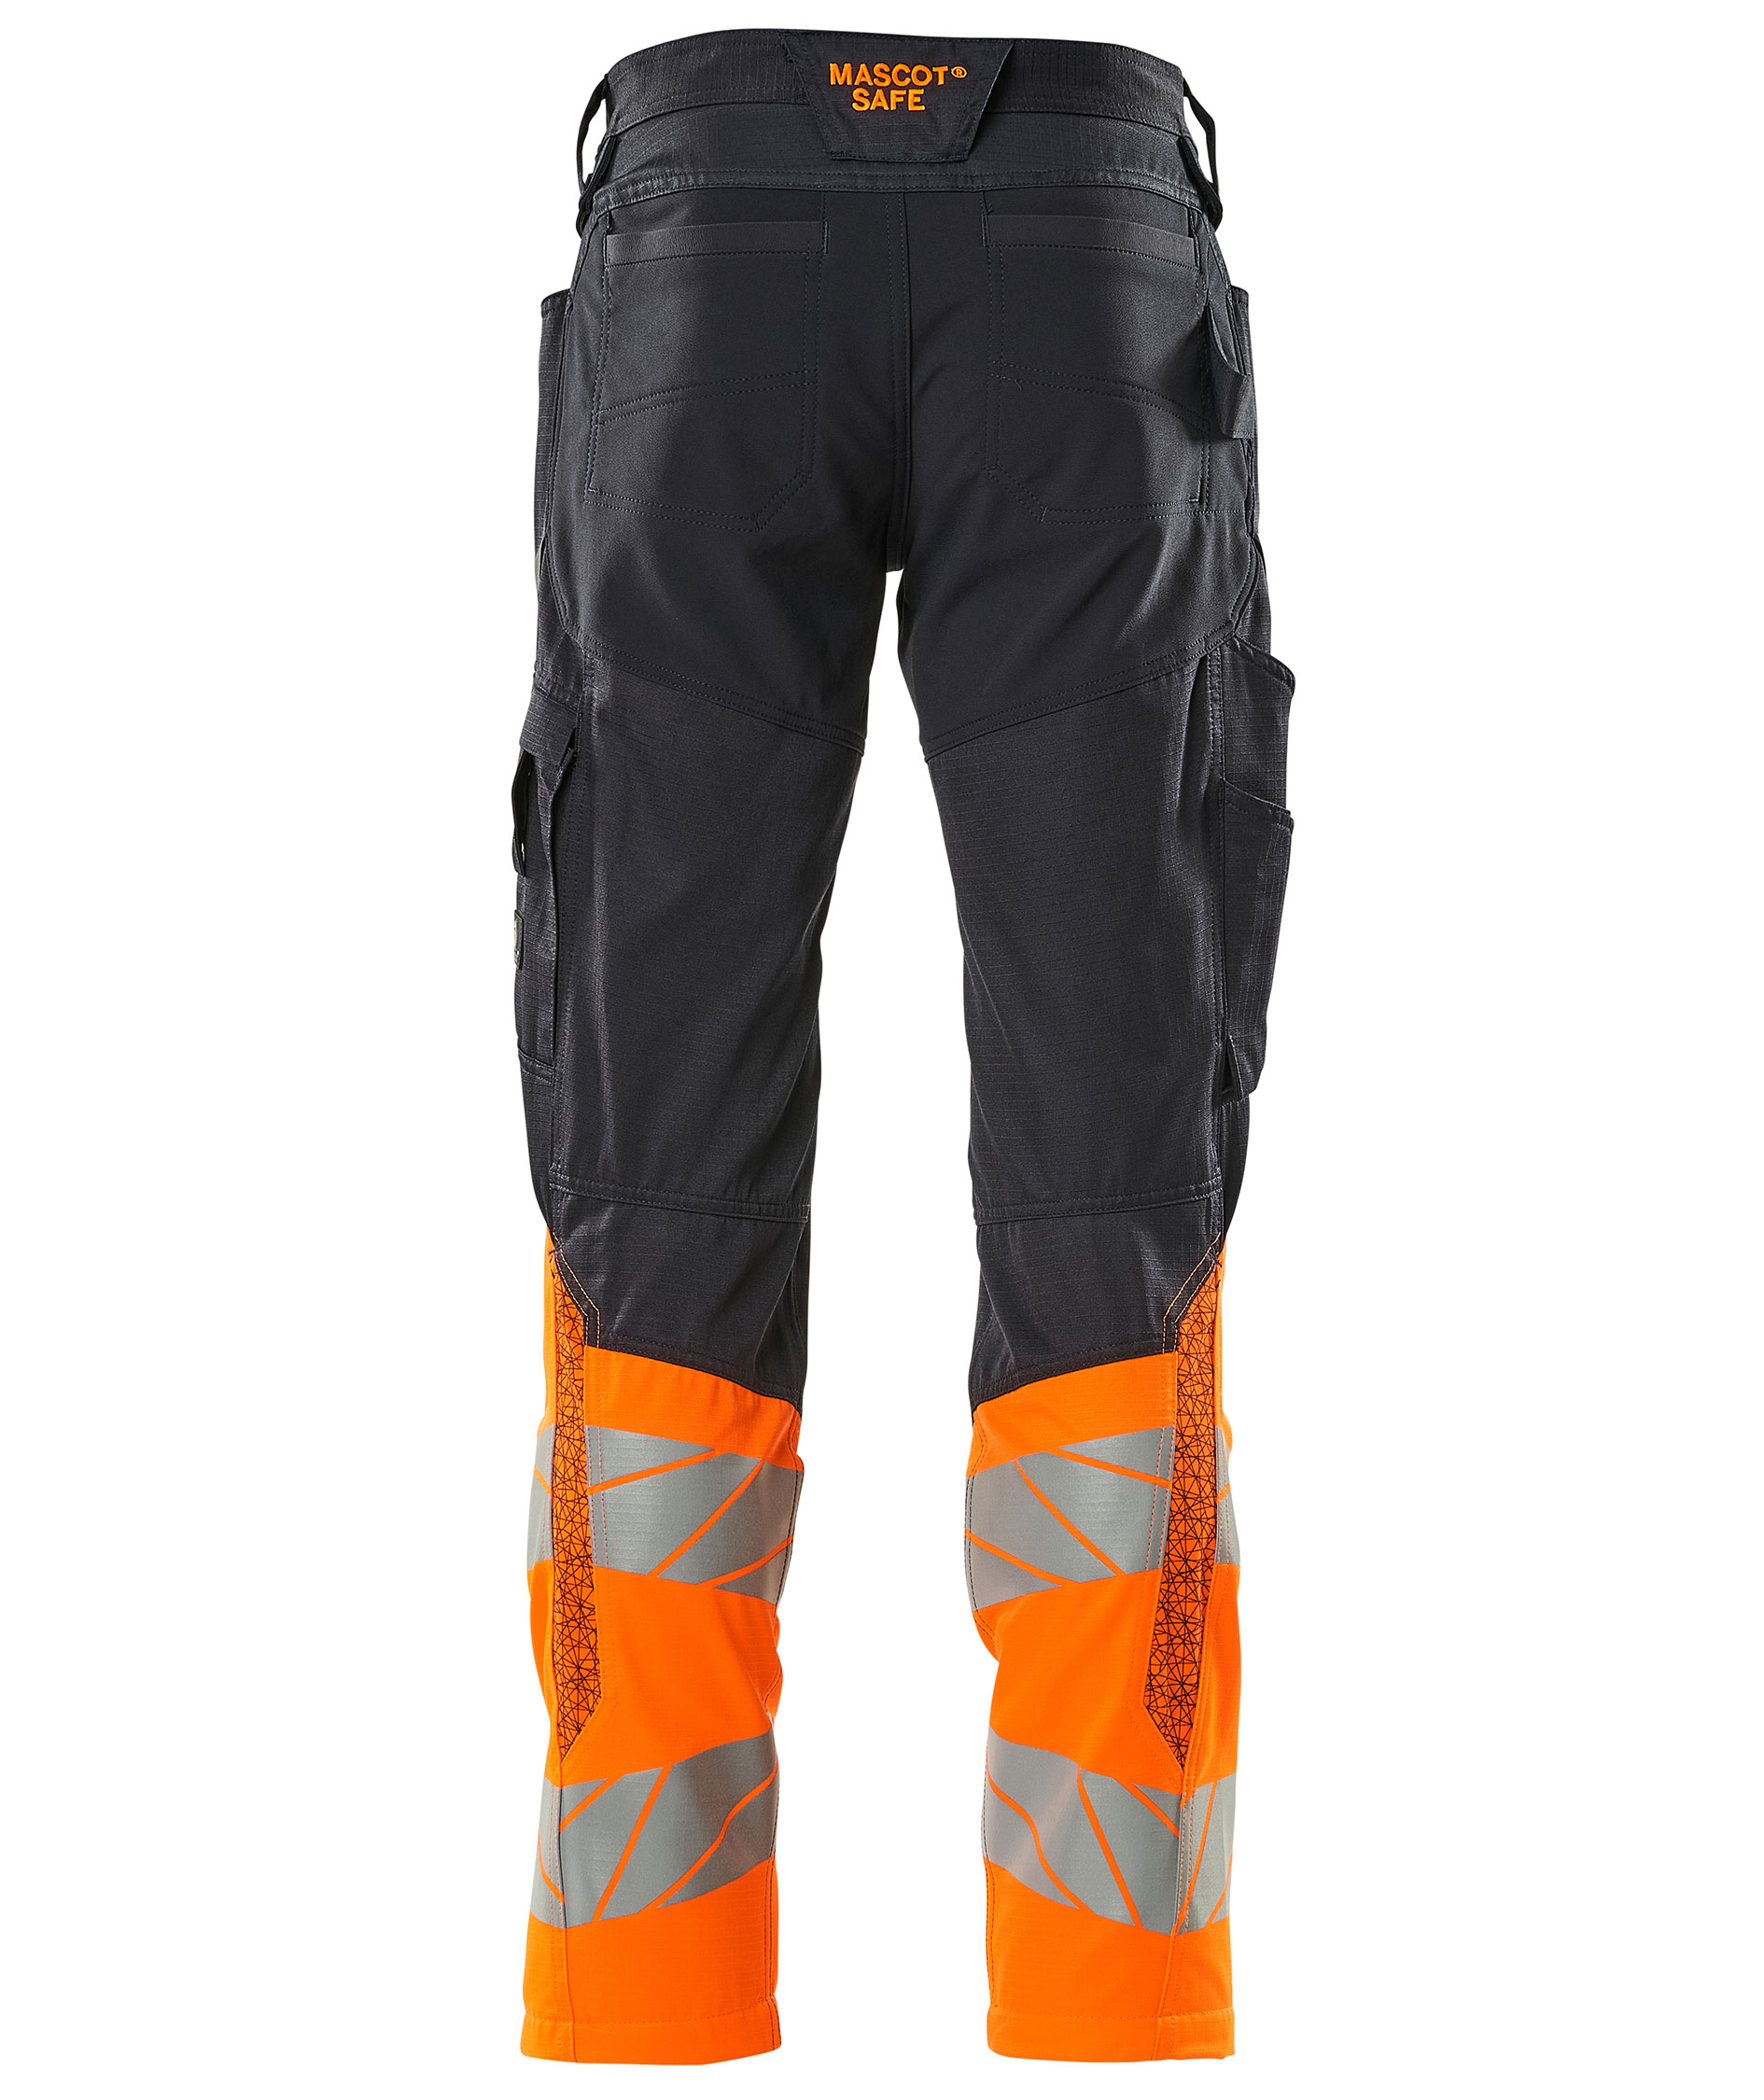 Buy Mascot Accelerate Safe work trousers at Cheap-workwear.com